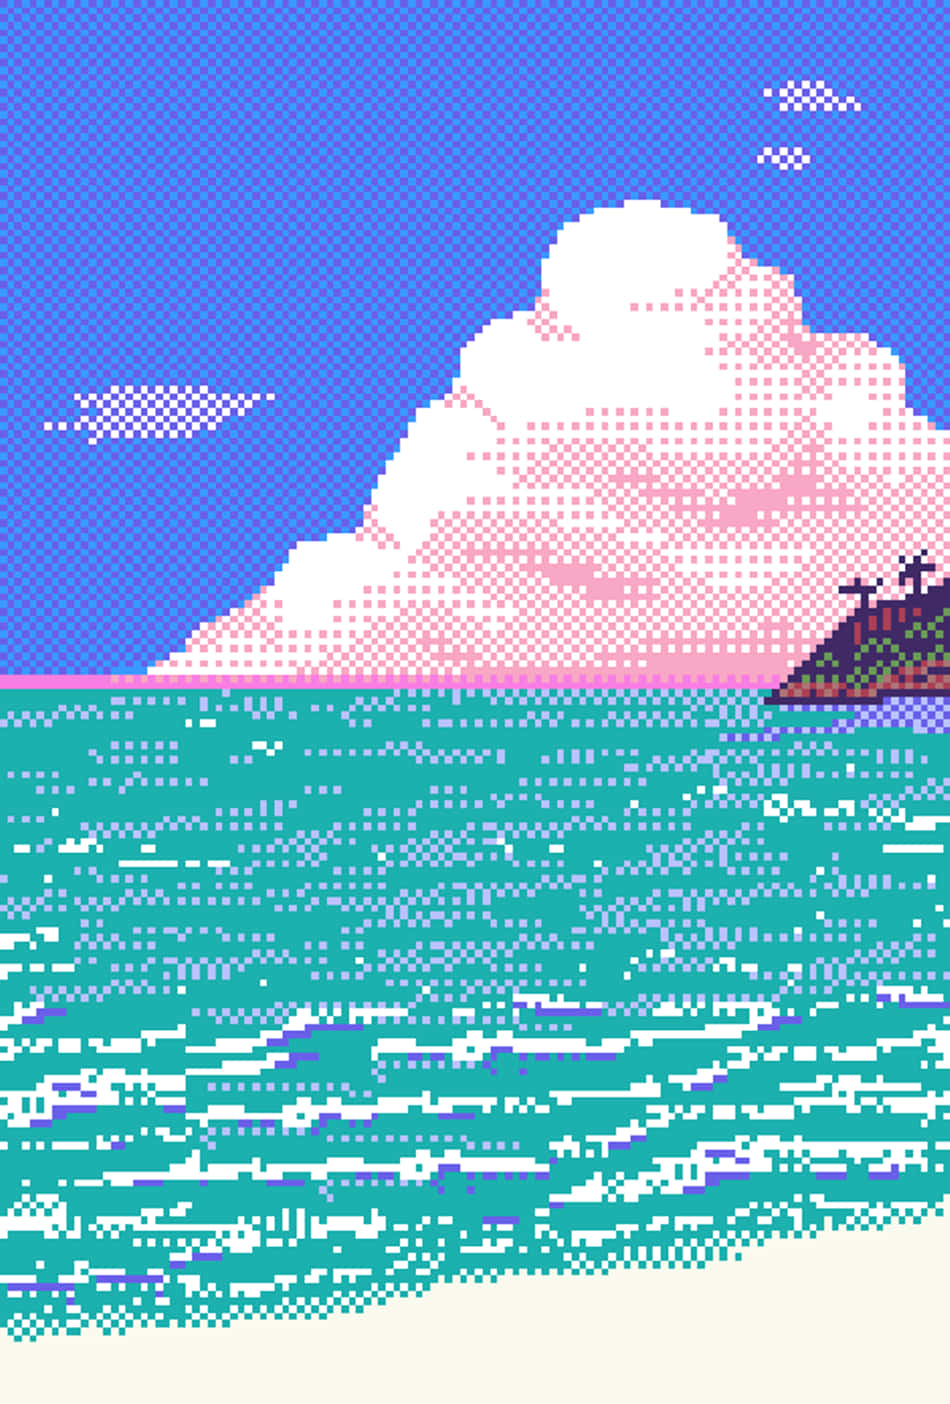 A Pixelated Image Of A Beach With A Cloud